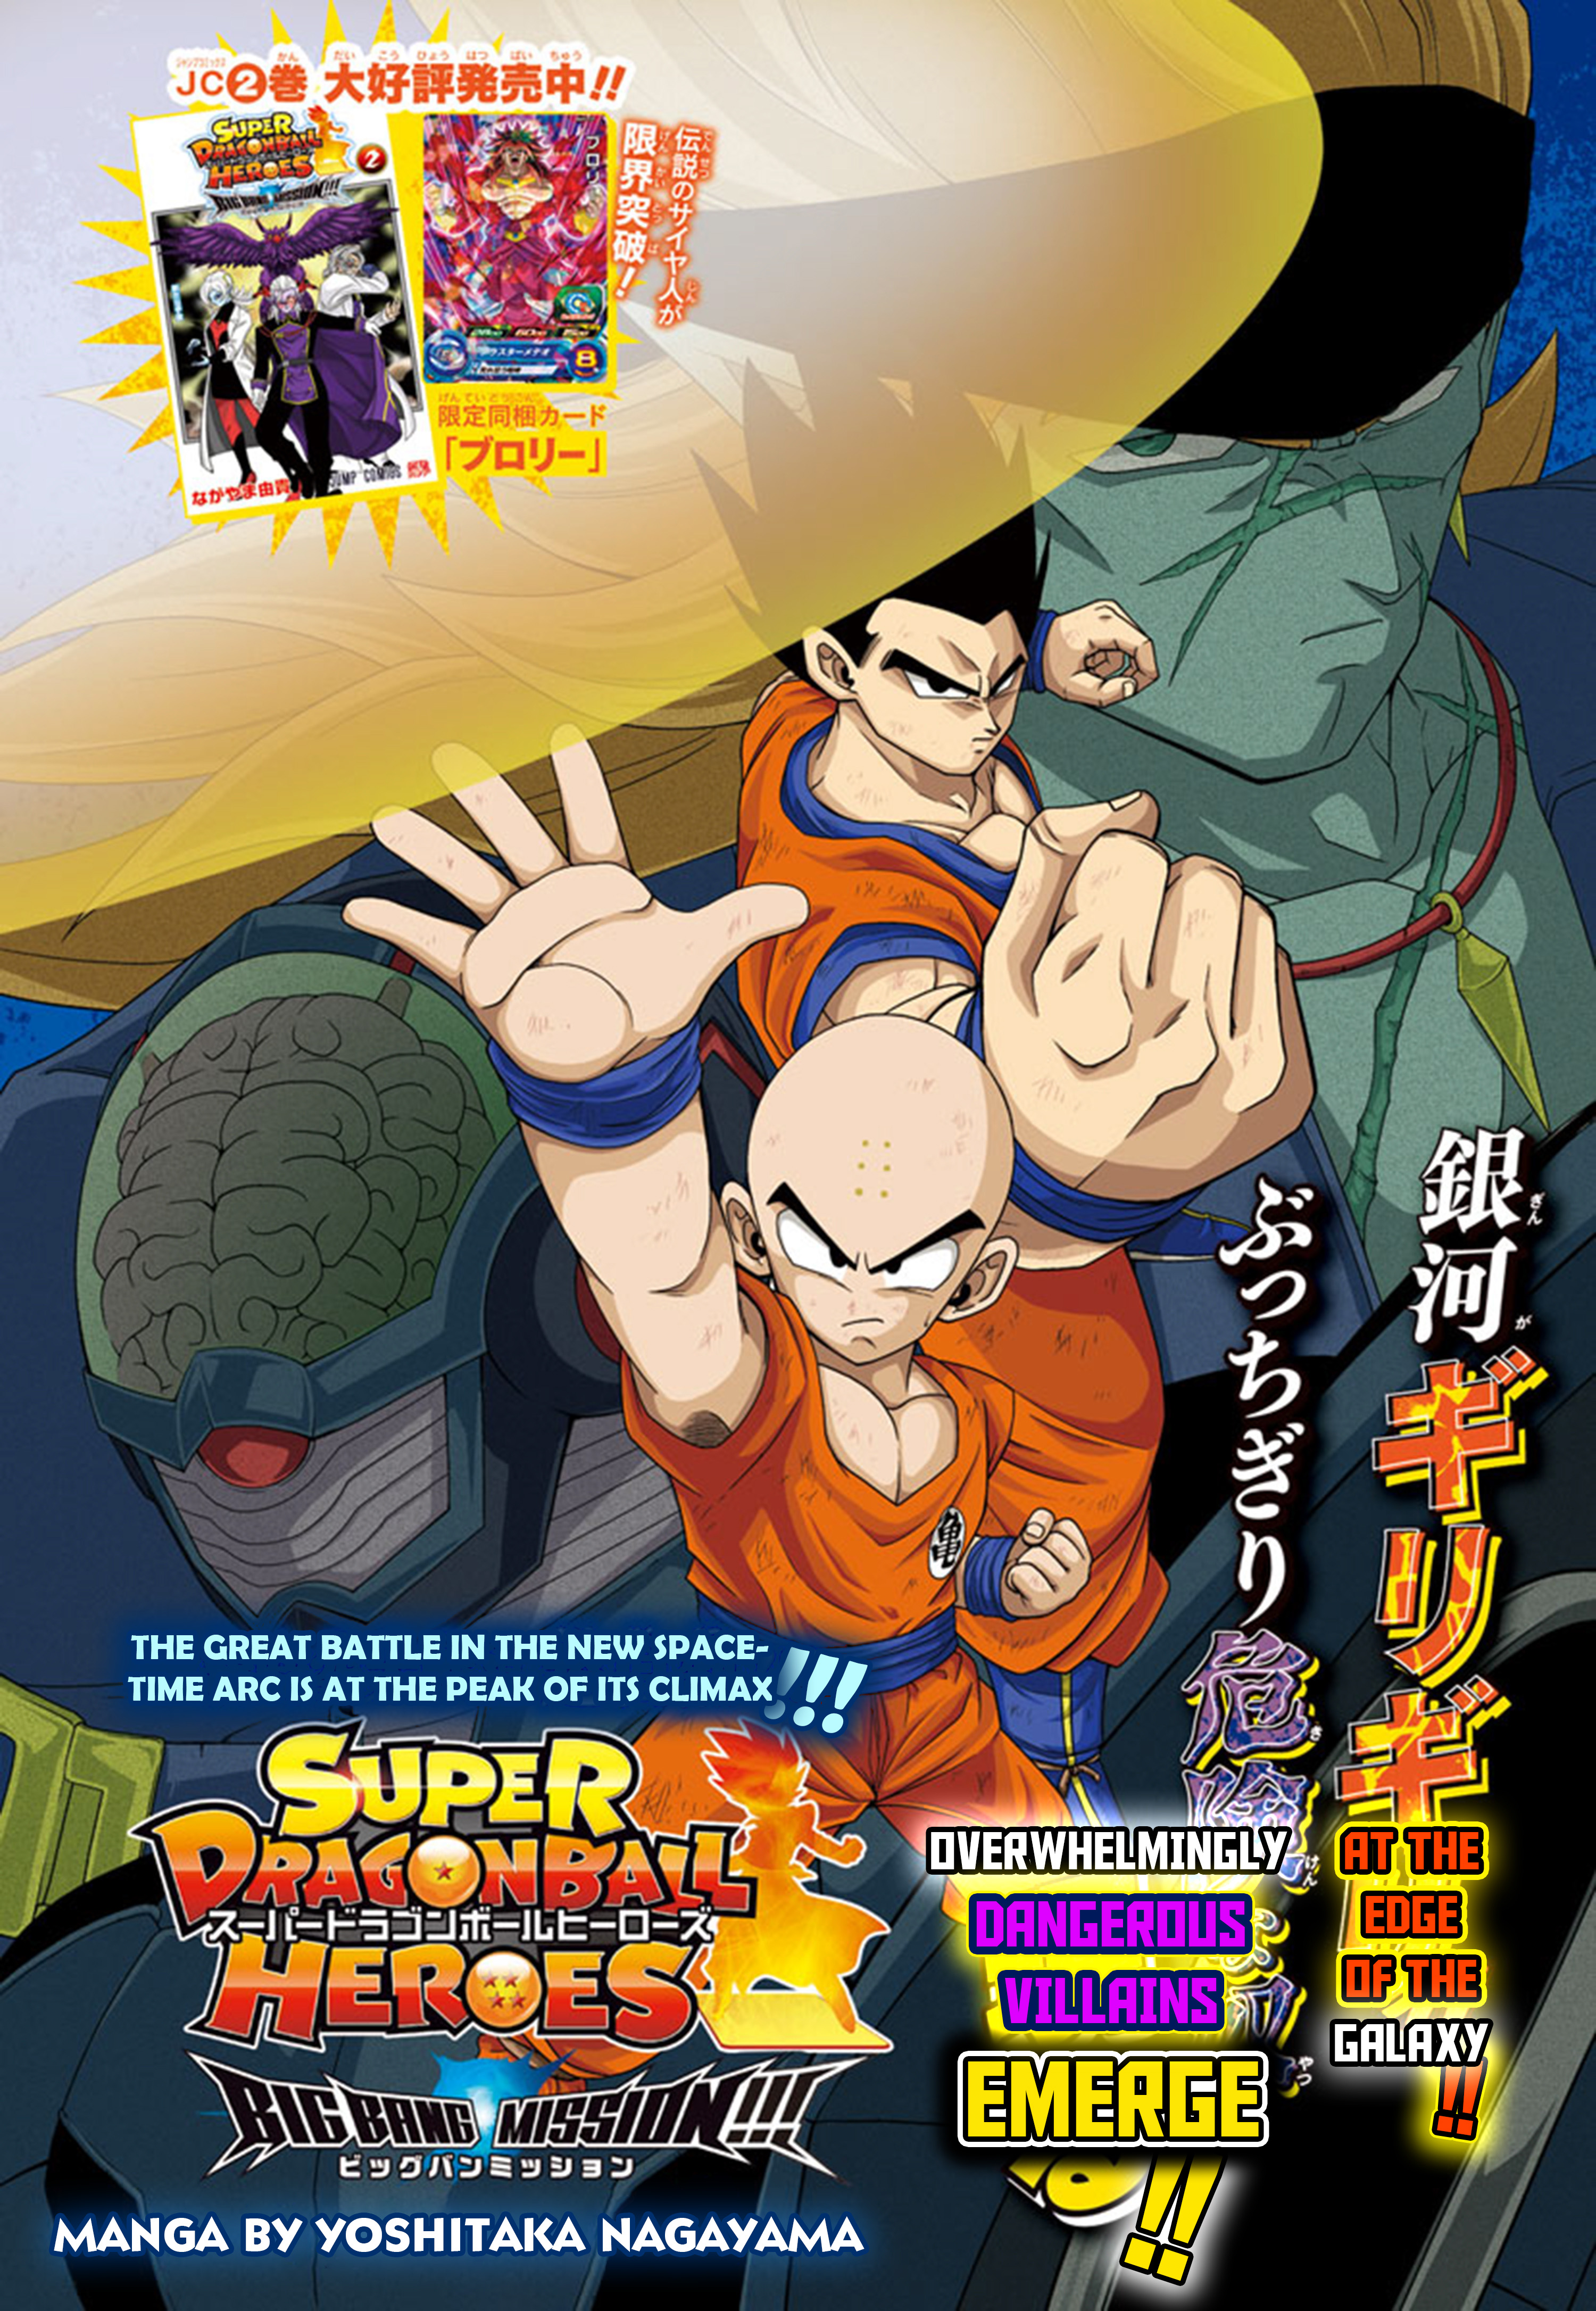 Super Dragon Ball Heroes: Big Bang Mission! Vol.3 Chapter 10: At The Edge Of The Galaxy, Overwhelmingly Dangerous Villains Emerge!! - Picture 1